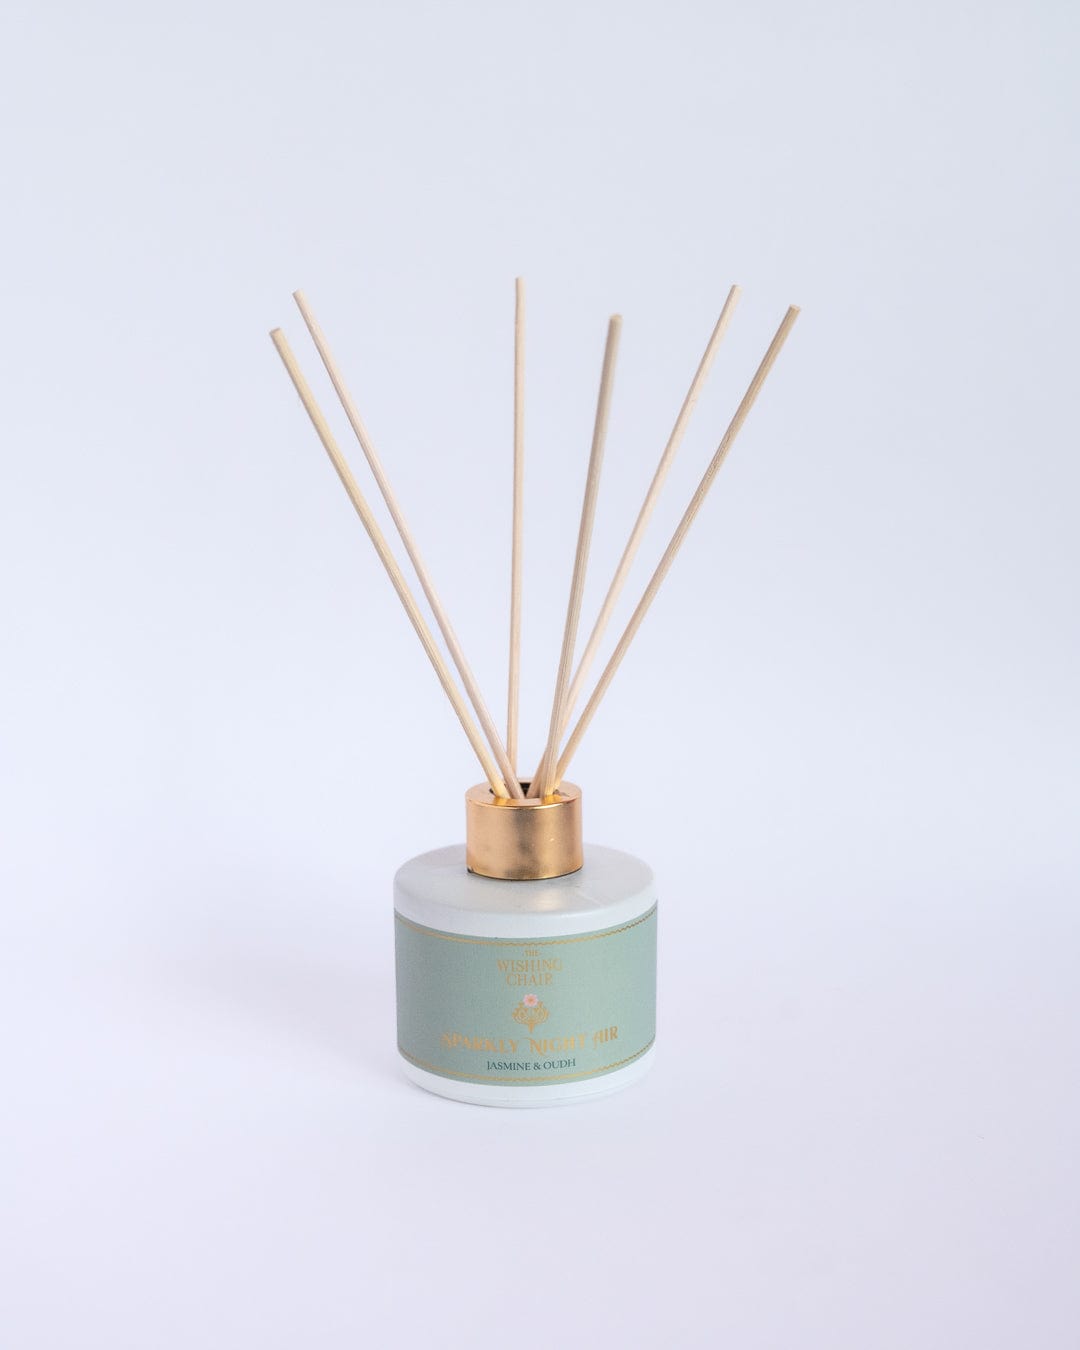 Sparkly Night Air Reed Diffuser